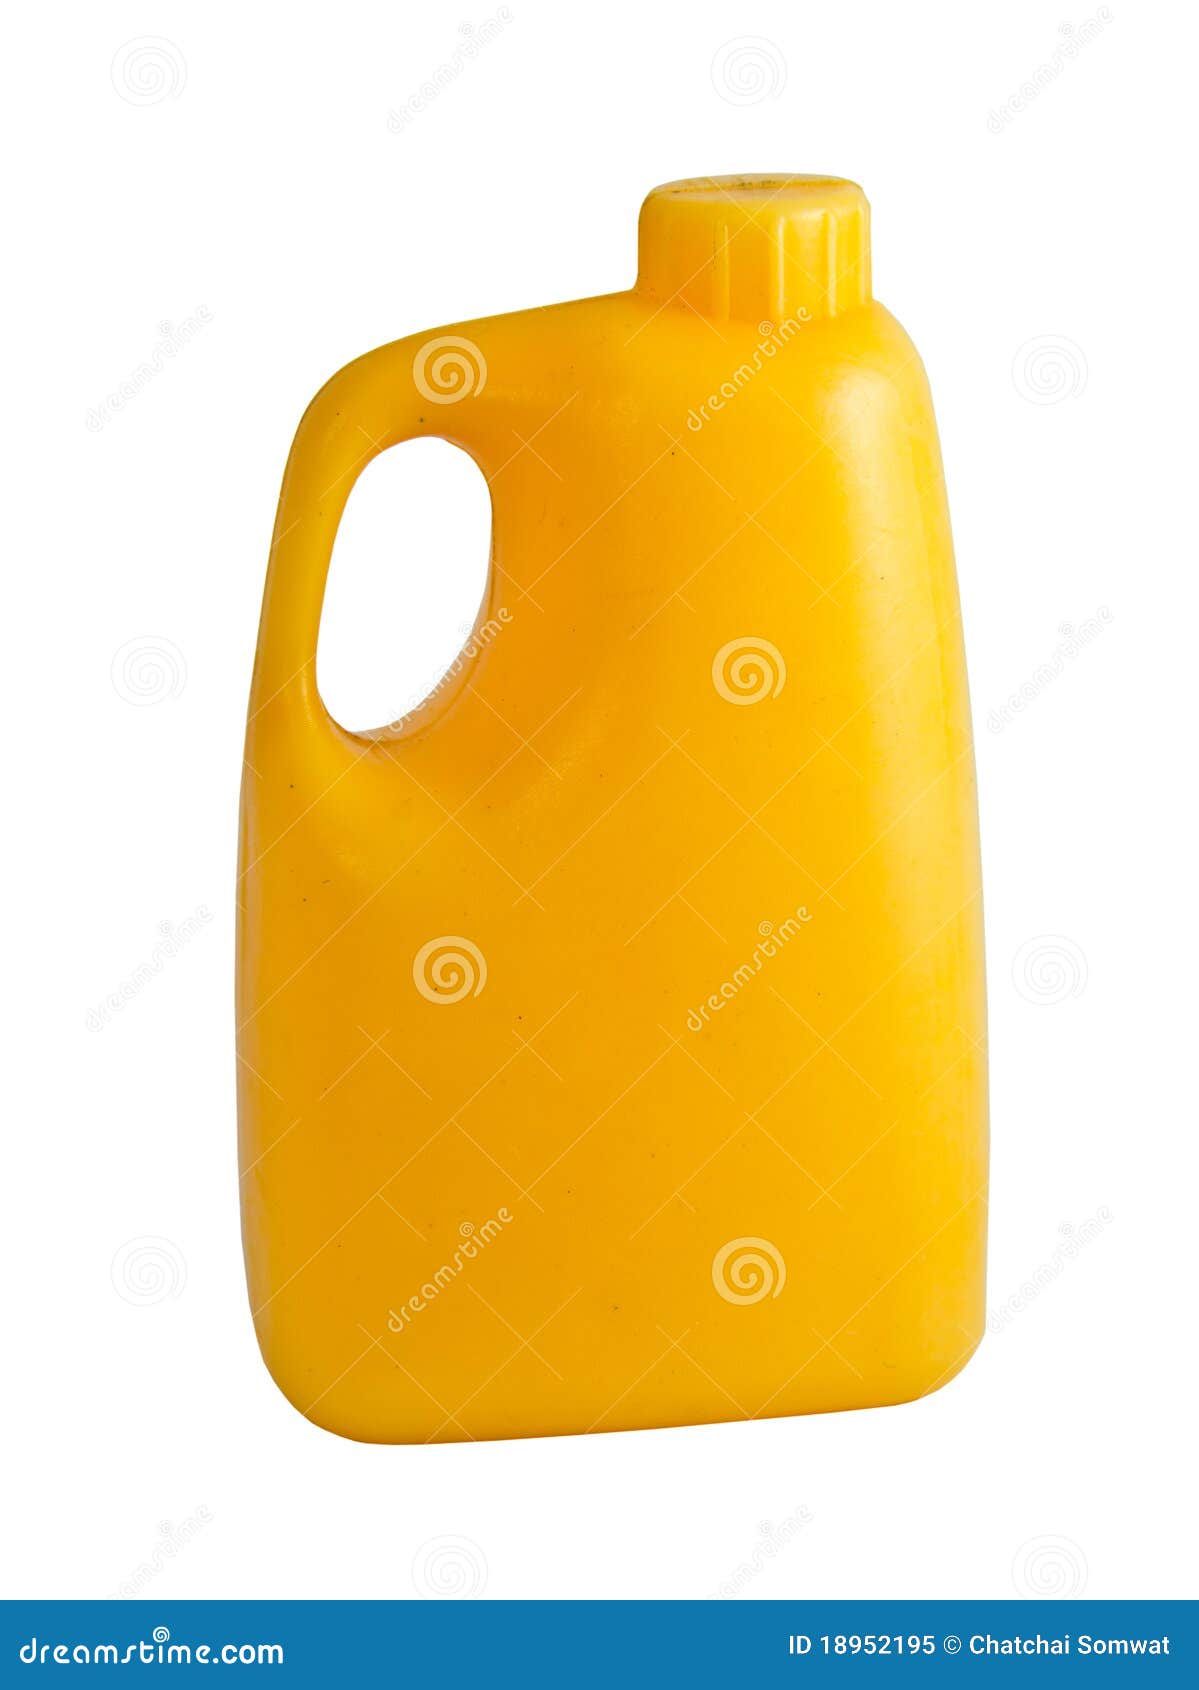 Gallons of yellow stock image. Image of calcium, color - 18952195